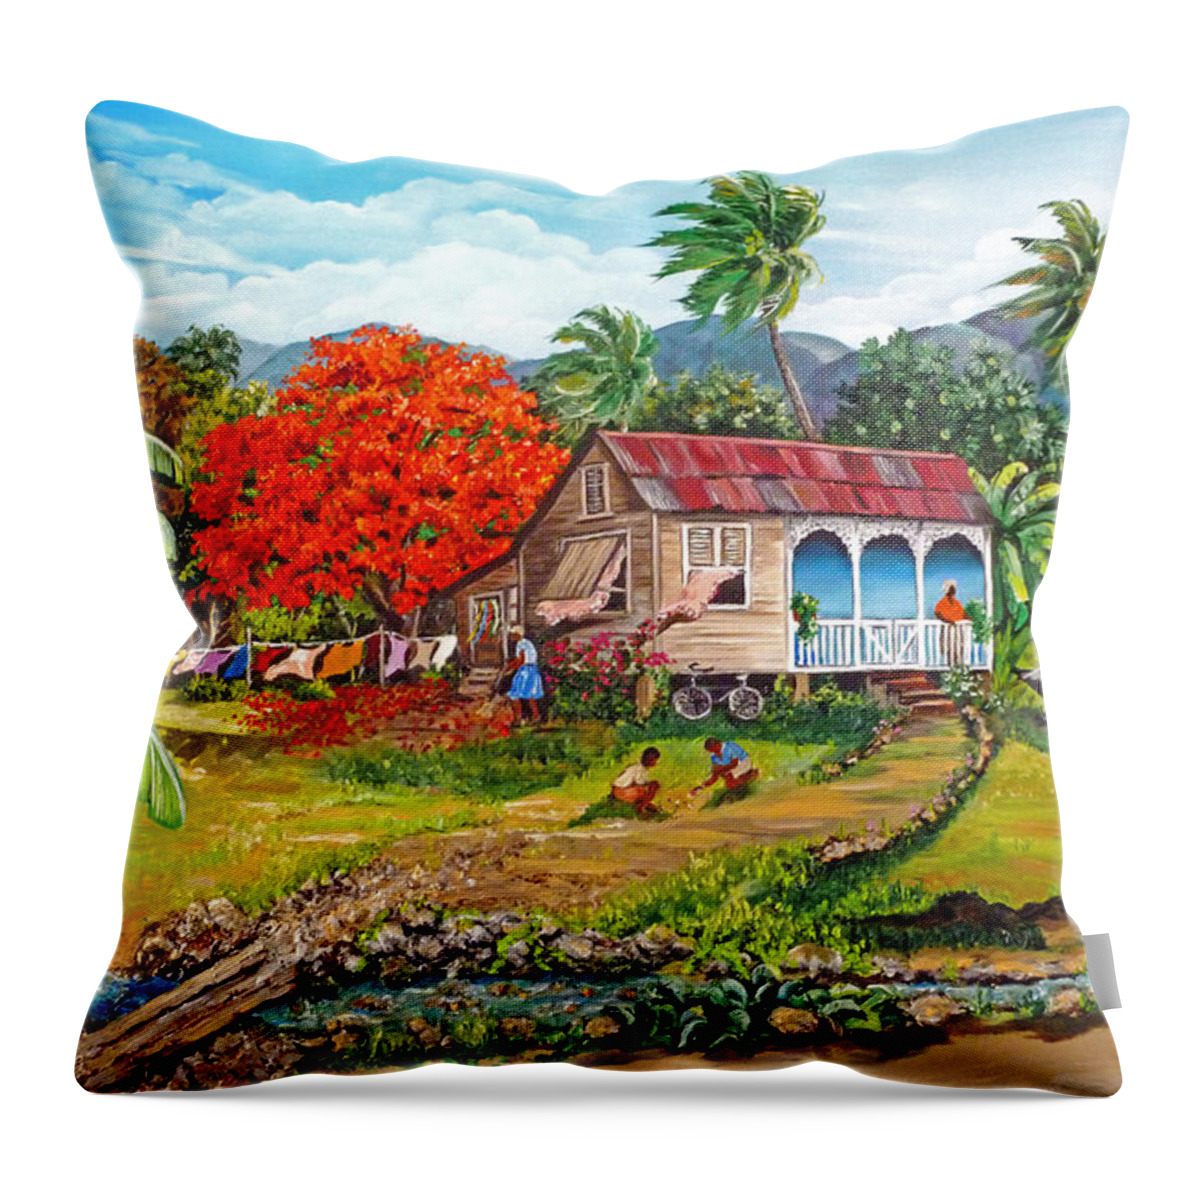 Tropical Scene Caribbean Scene Throw Pillow featuring the painting The Sweet Life by Karin Dawn Kelshall- Best